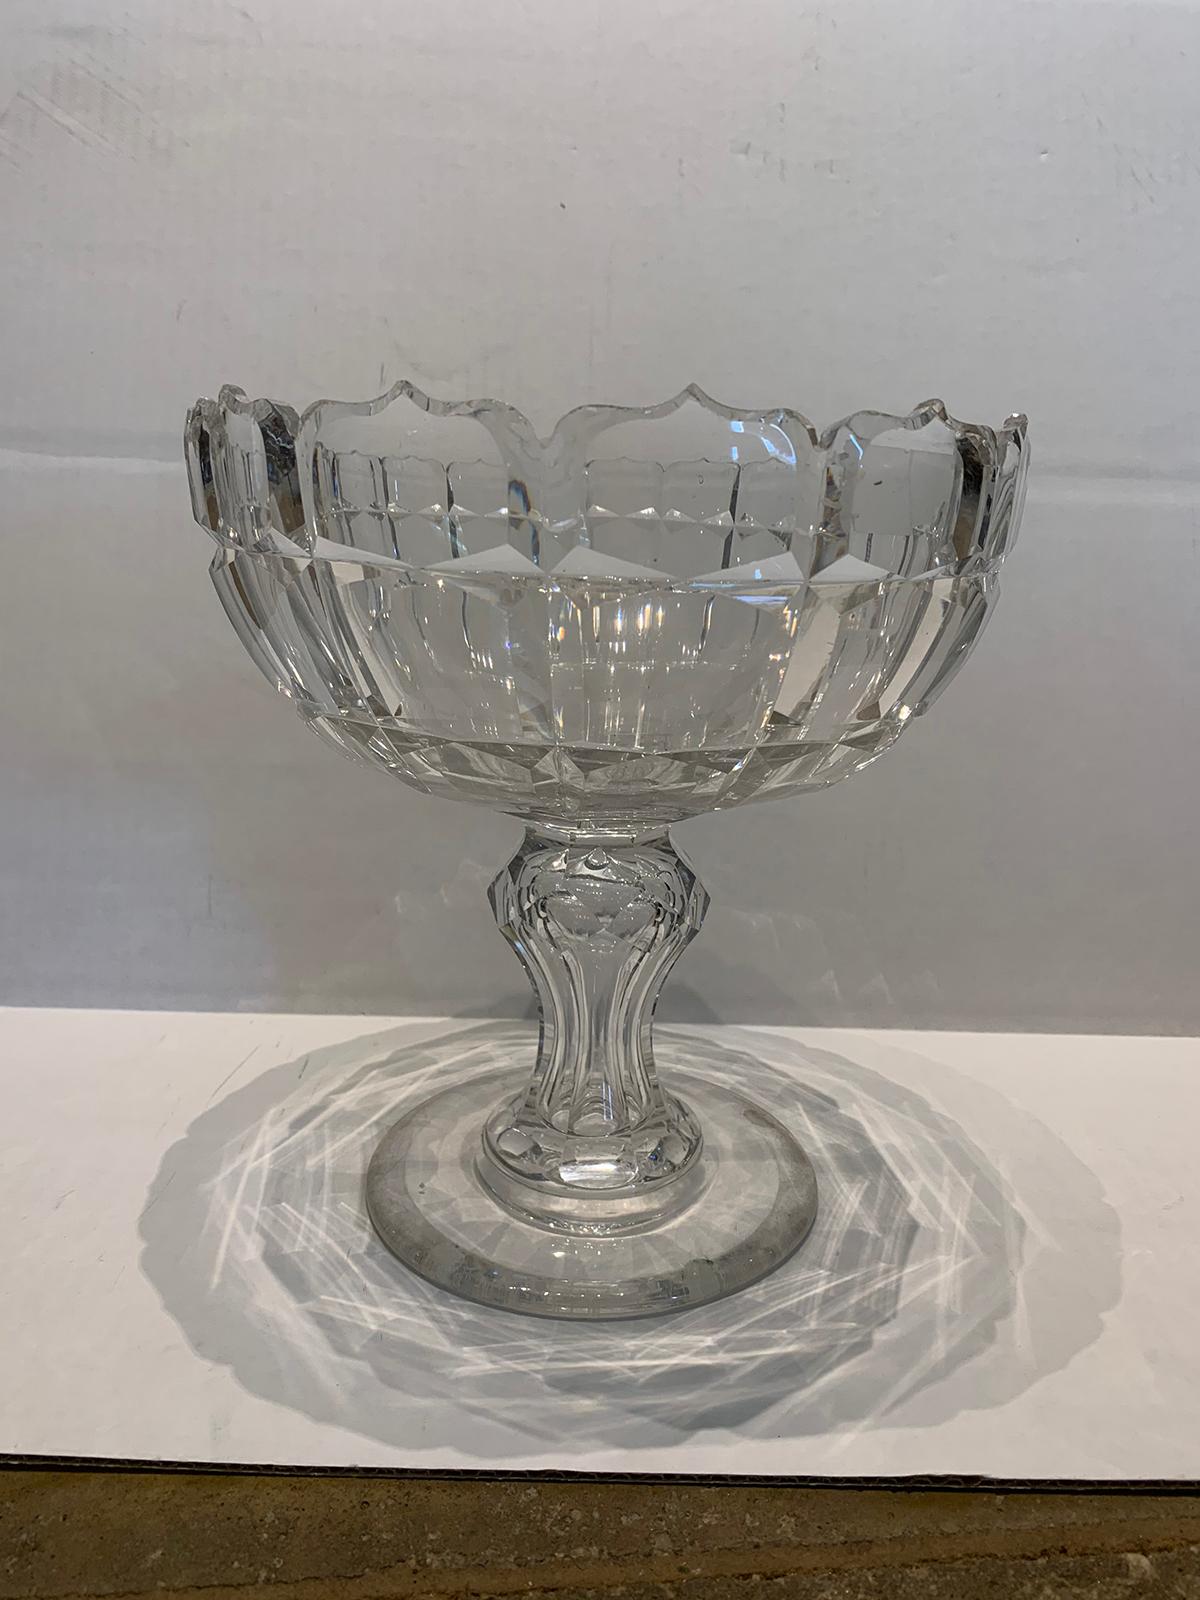 19th-20th century Irish crystal compote or pedestal bowl.